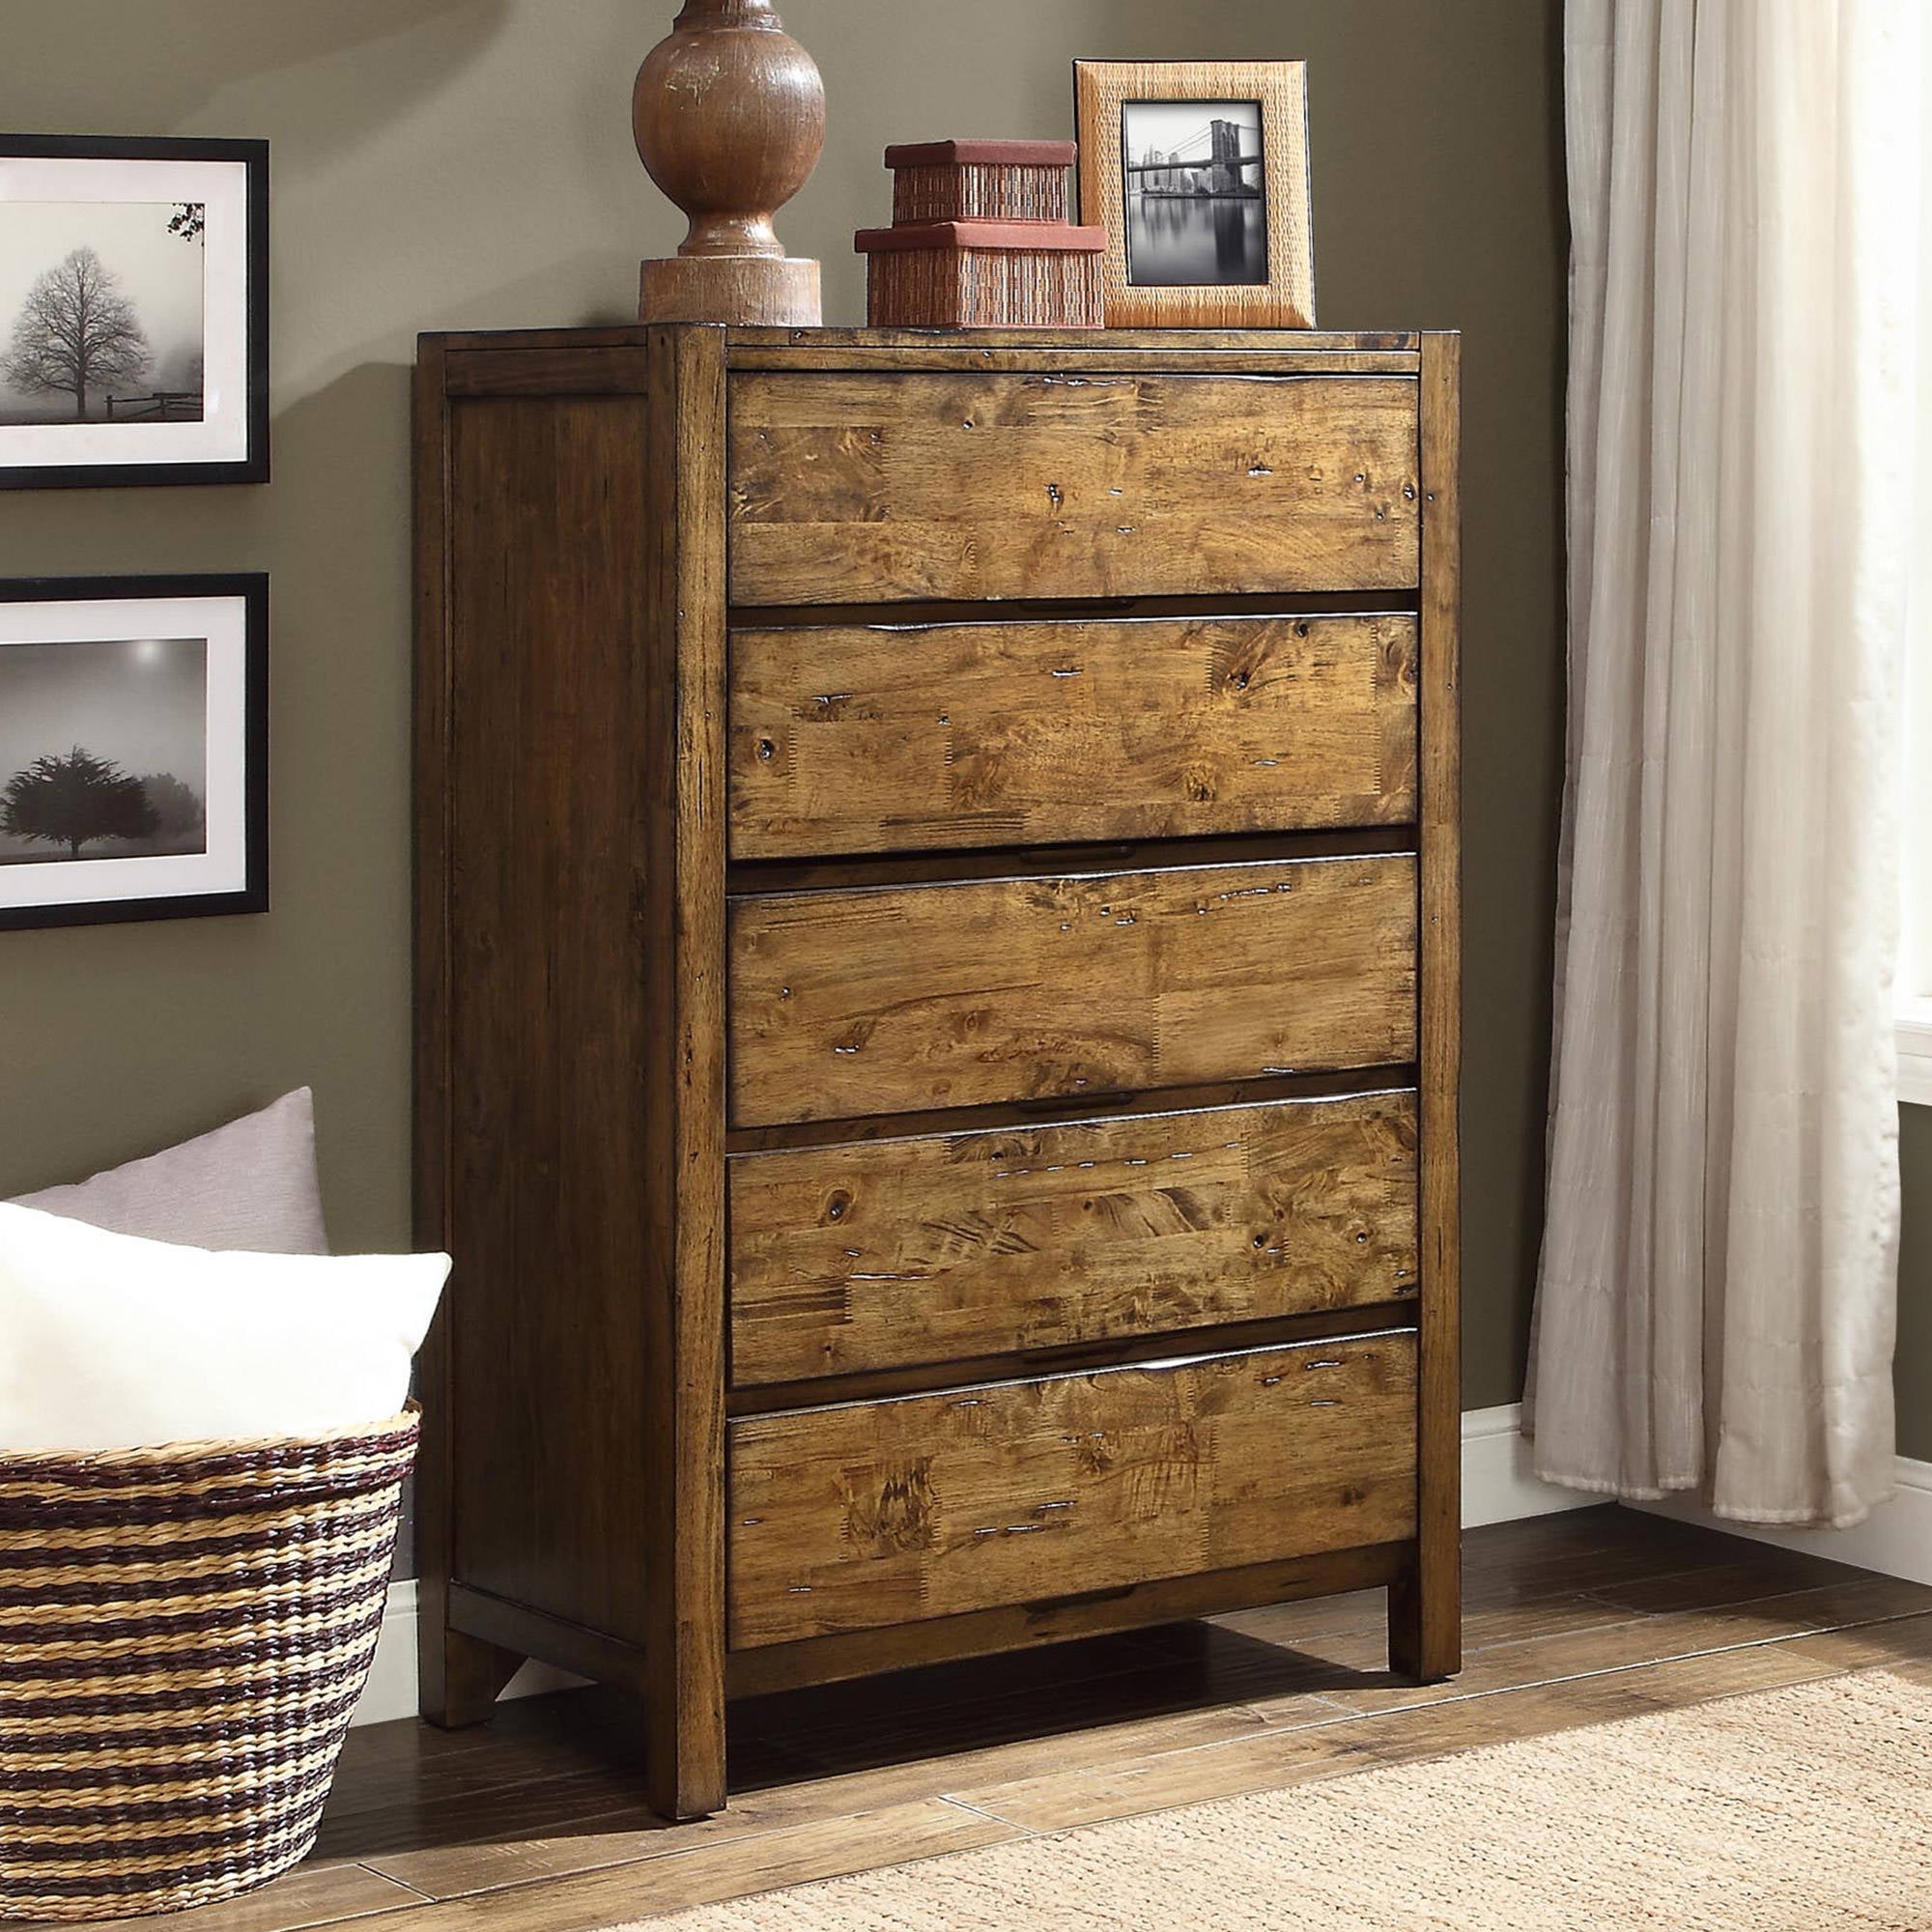 ORIGINAL RUSTIC Rustic Solid Oak Chest of Drawers Furniture for Living Room Chest of 7 Drawers Solid Oak